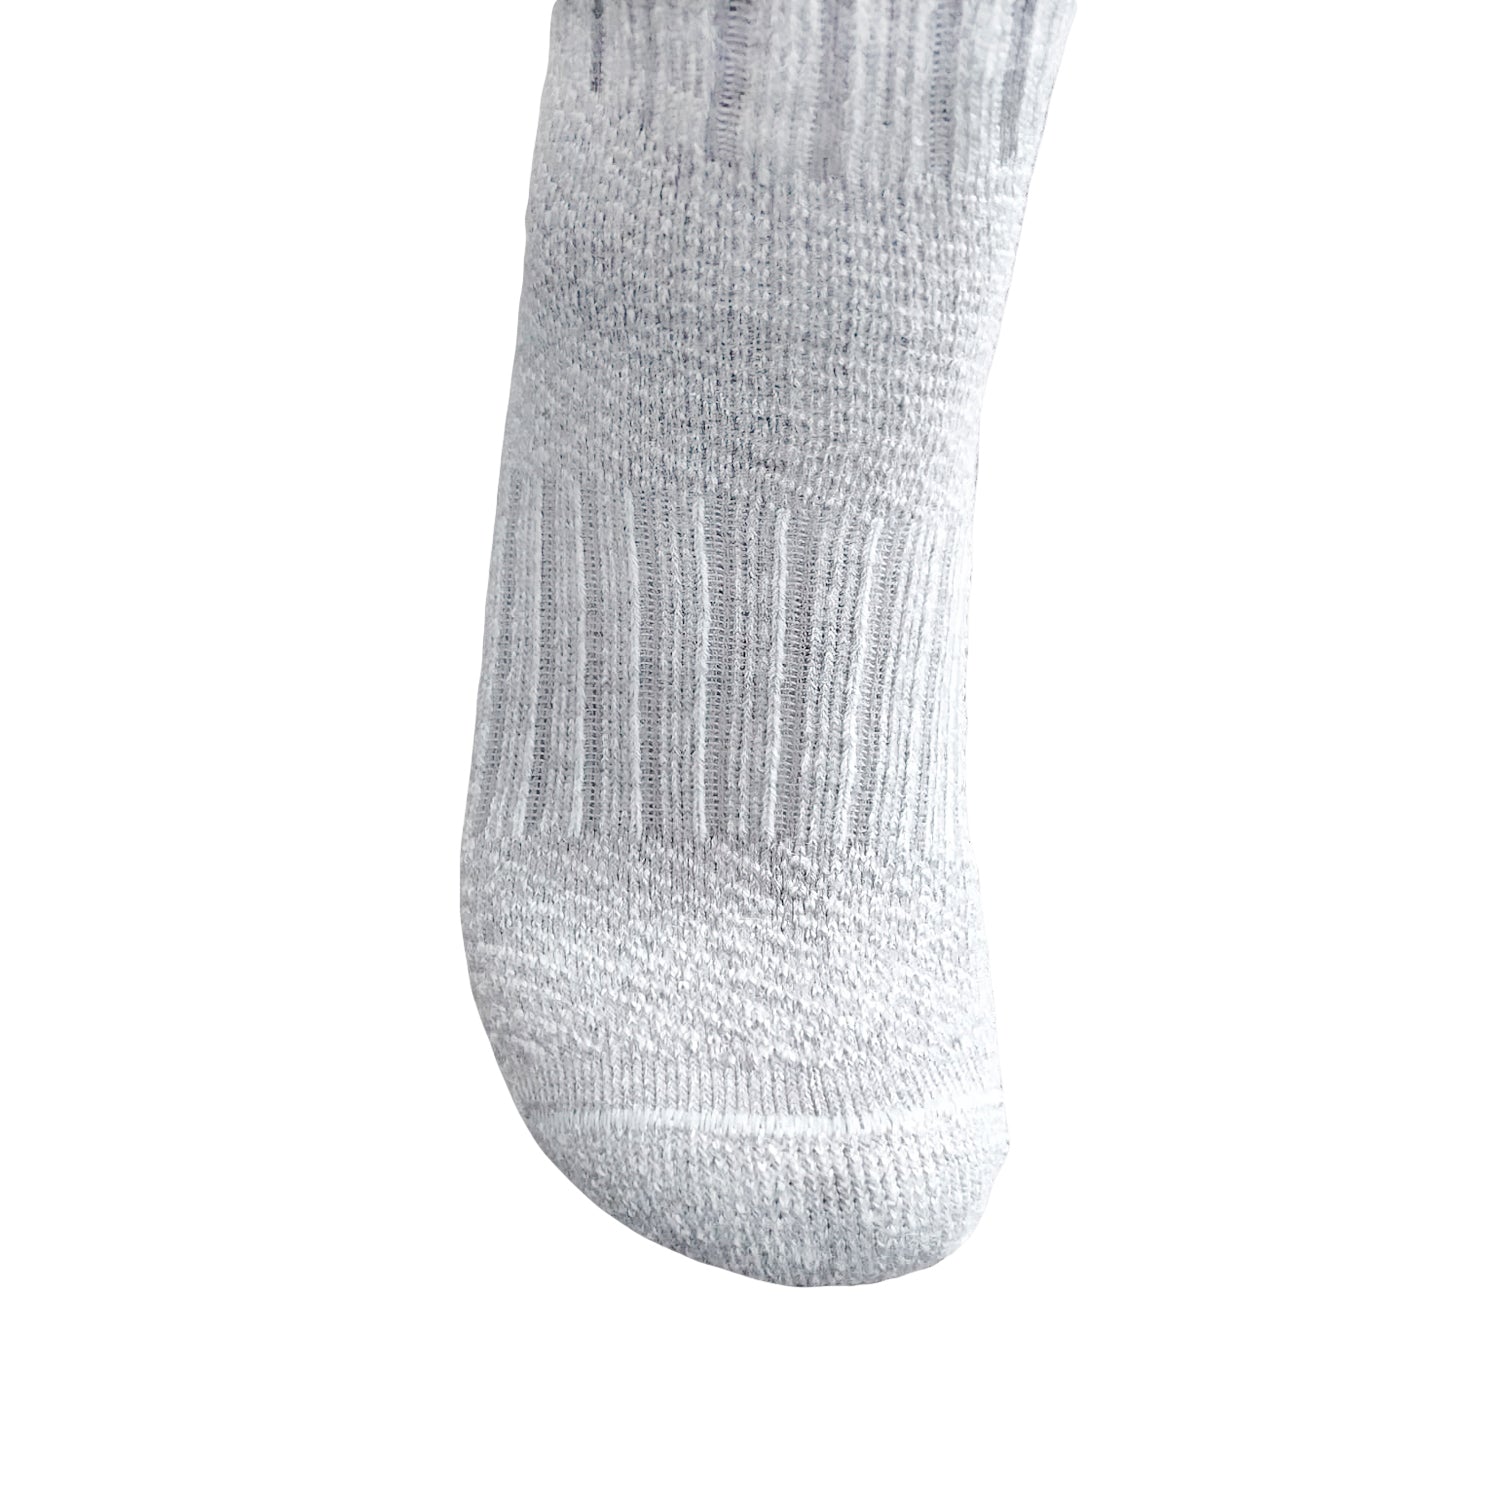 Alpaca socks thermal for Kids - Made in Quebec - Boutique art Inca